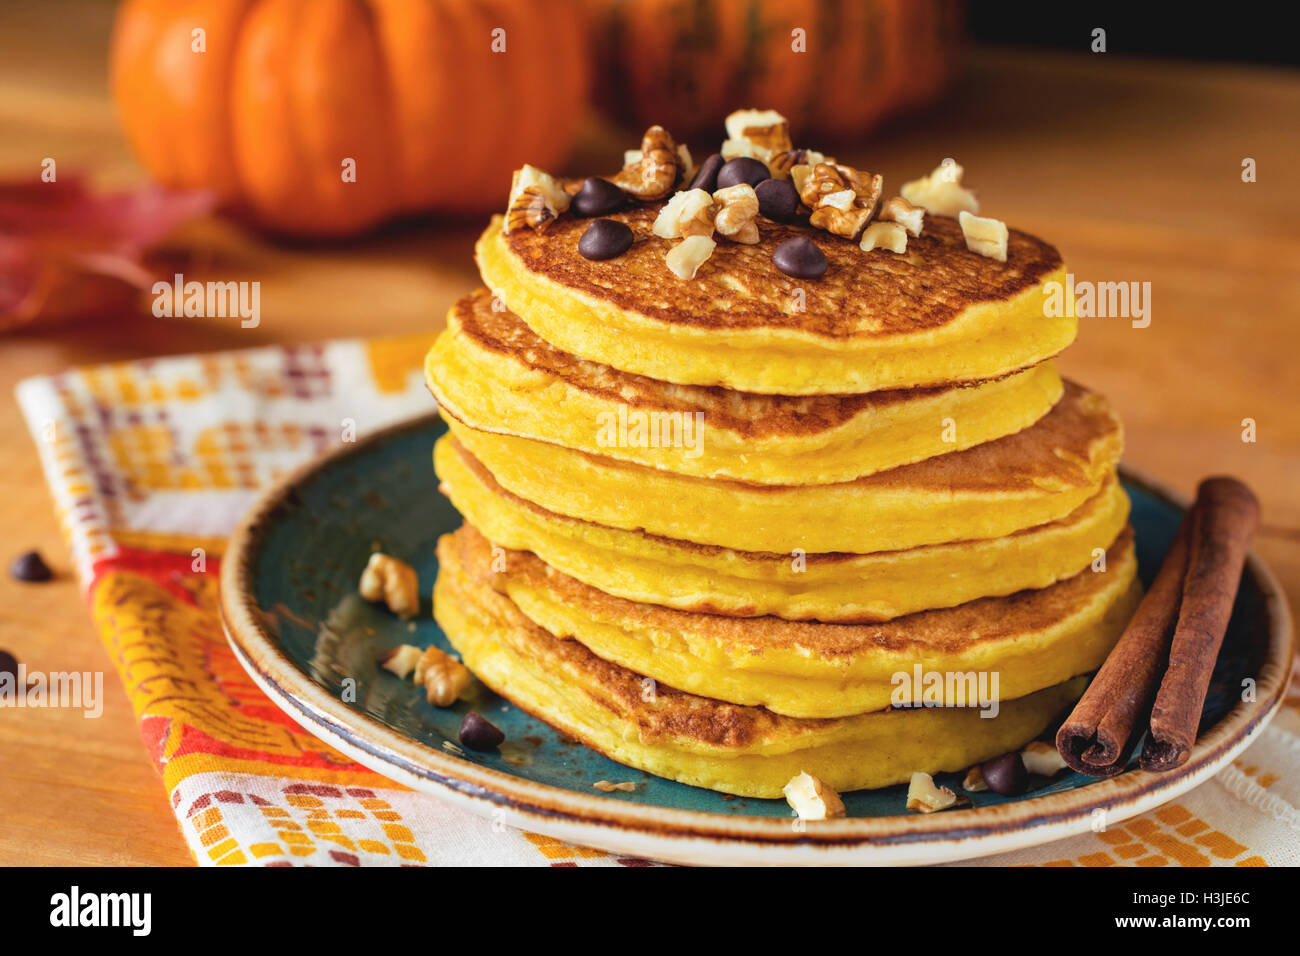 Pumpkin pancakes with nuts and chocolate on plate. Close up. Autumn breakfast meal, traditional American cuisine Stock Photo